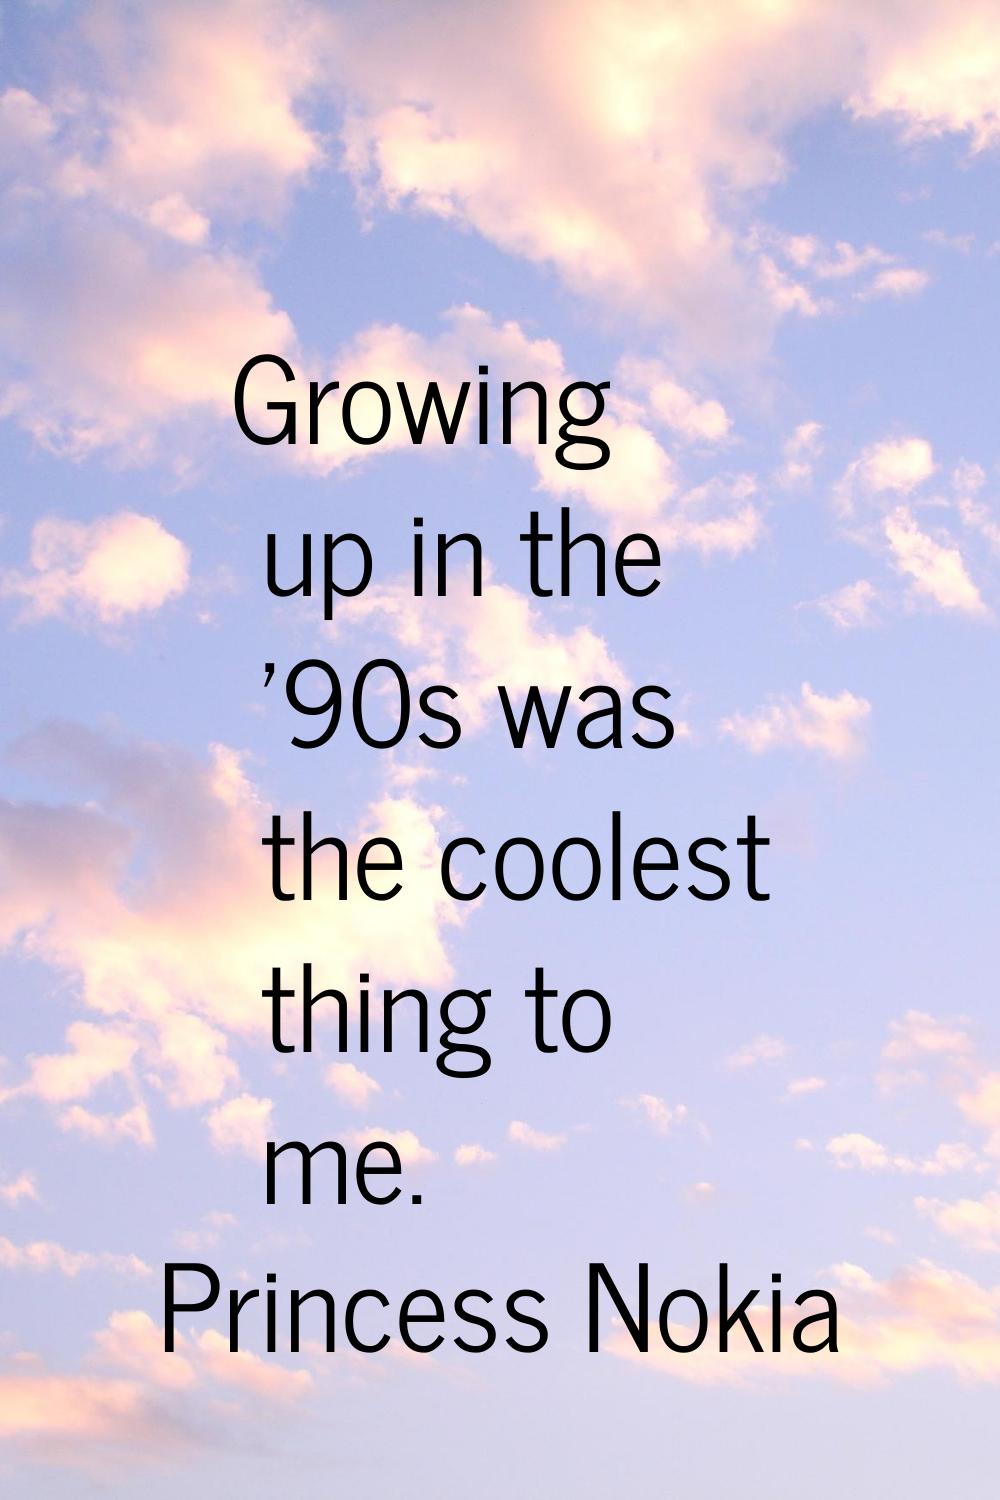 Growing up in the '90s was the coolest thing to me.